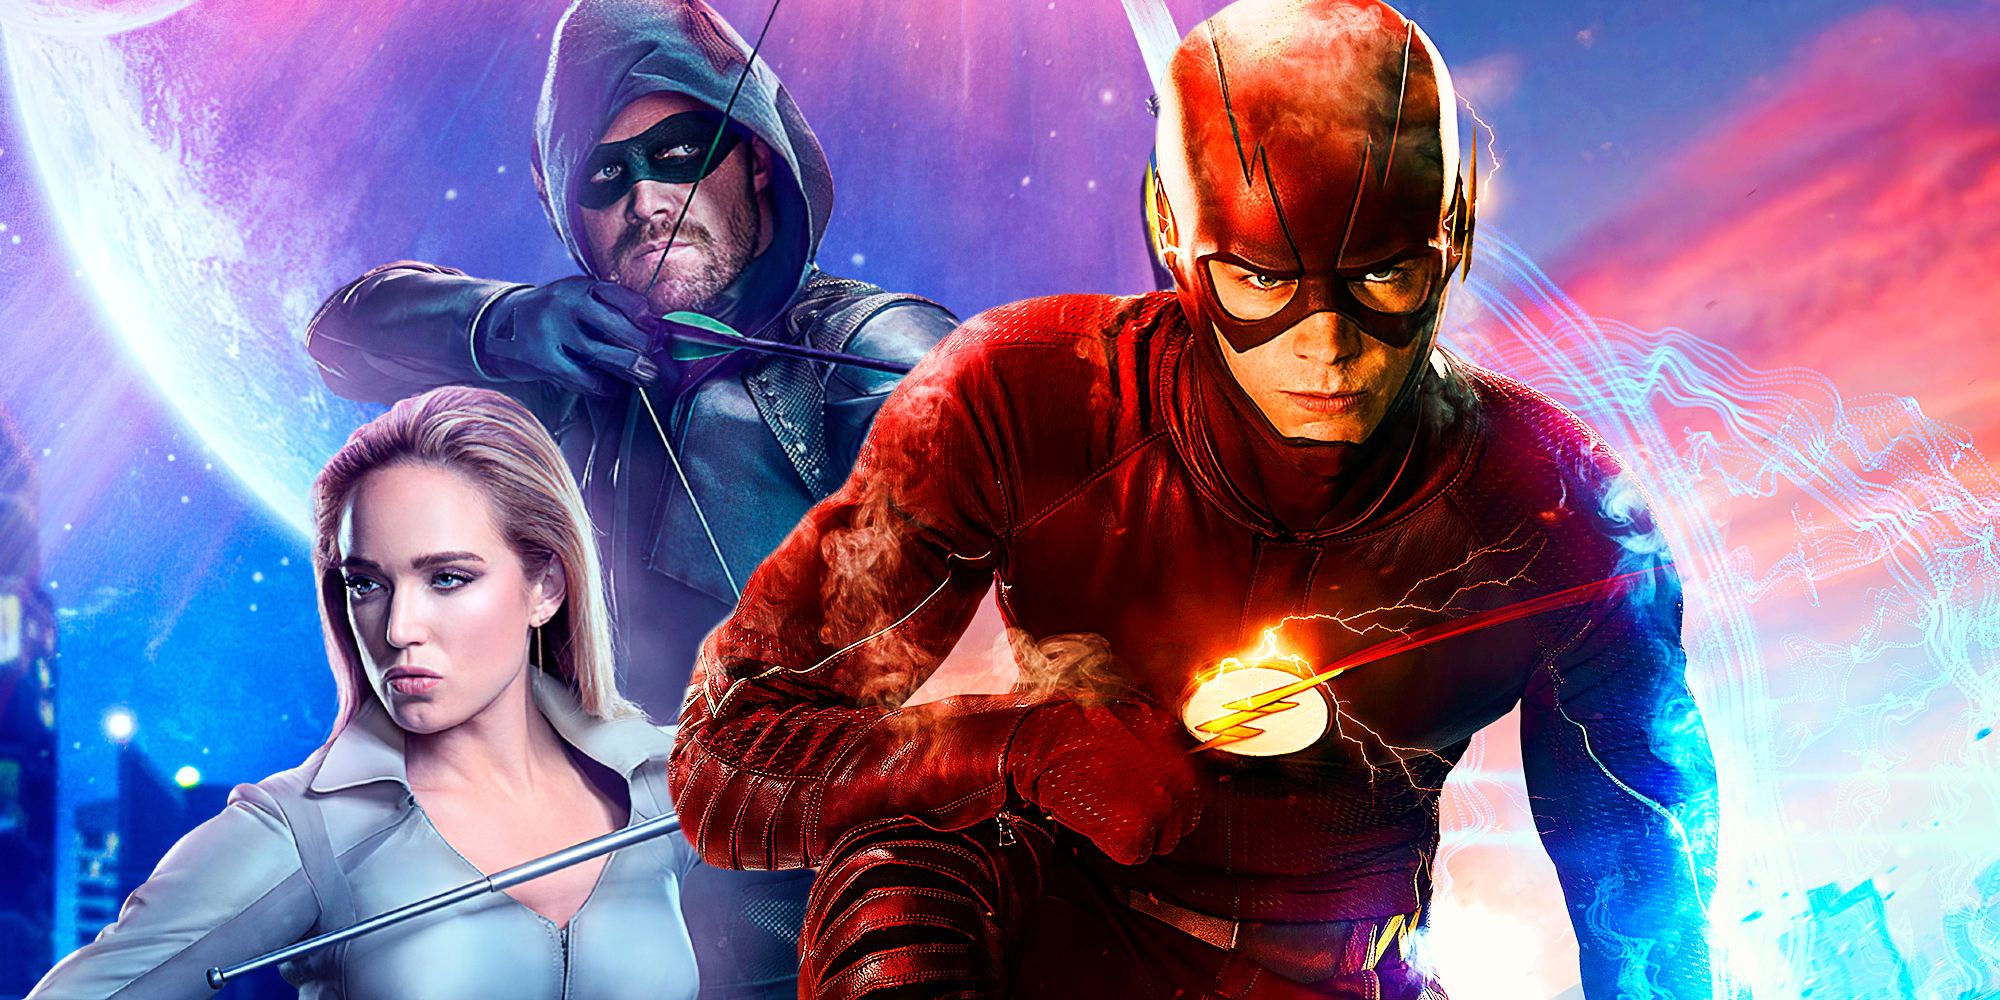 Caity Lotz as Sarah Lance, Stephen Amell as Green Arrow, and Grant Gustin as Flash